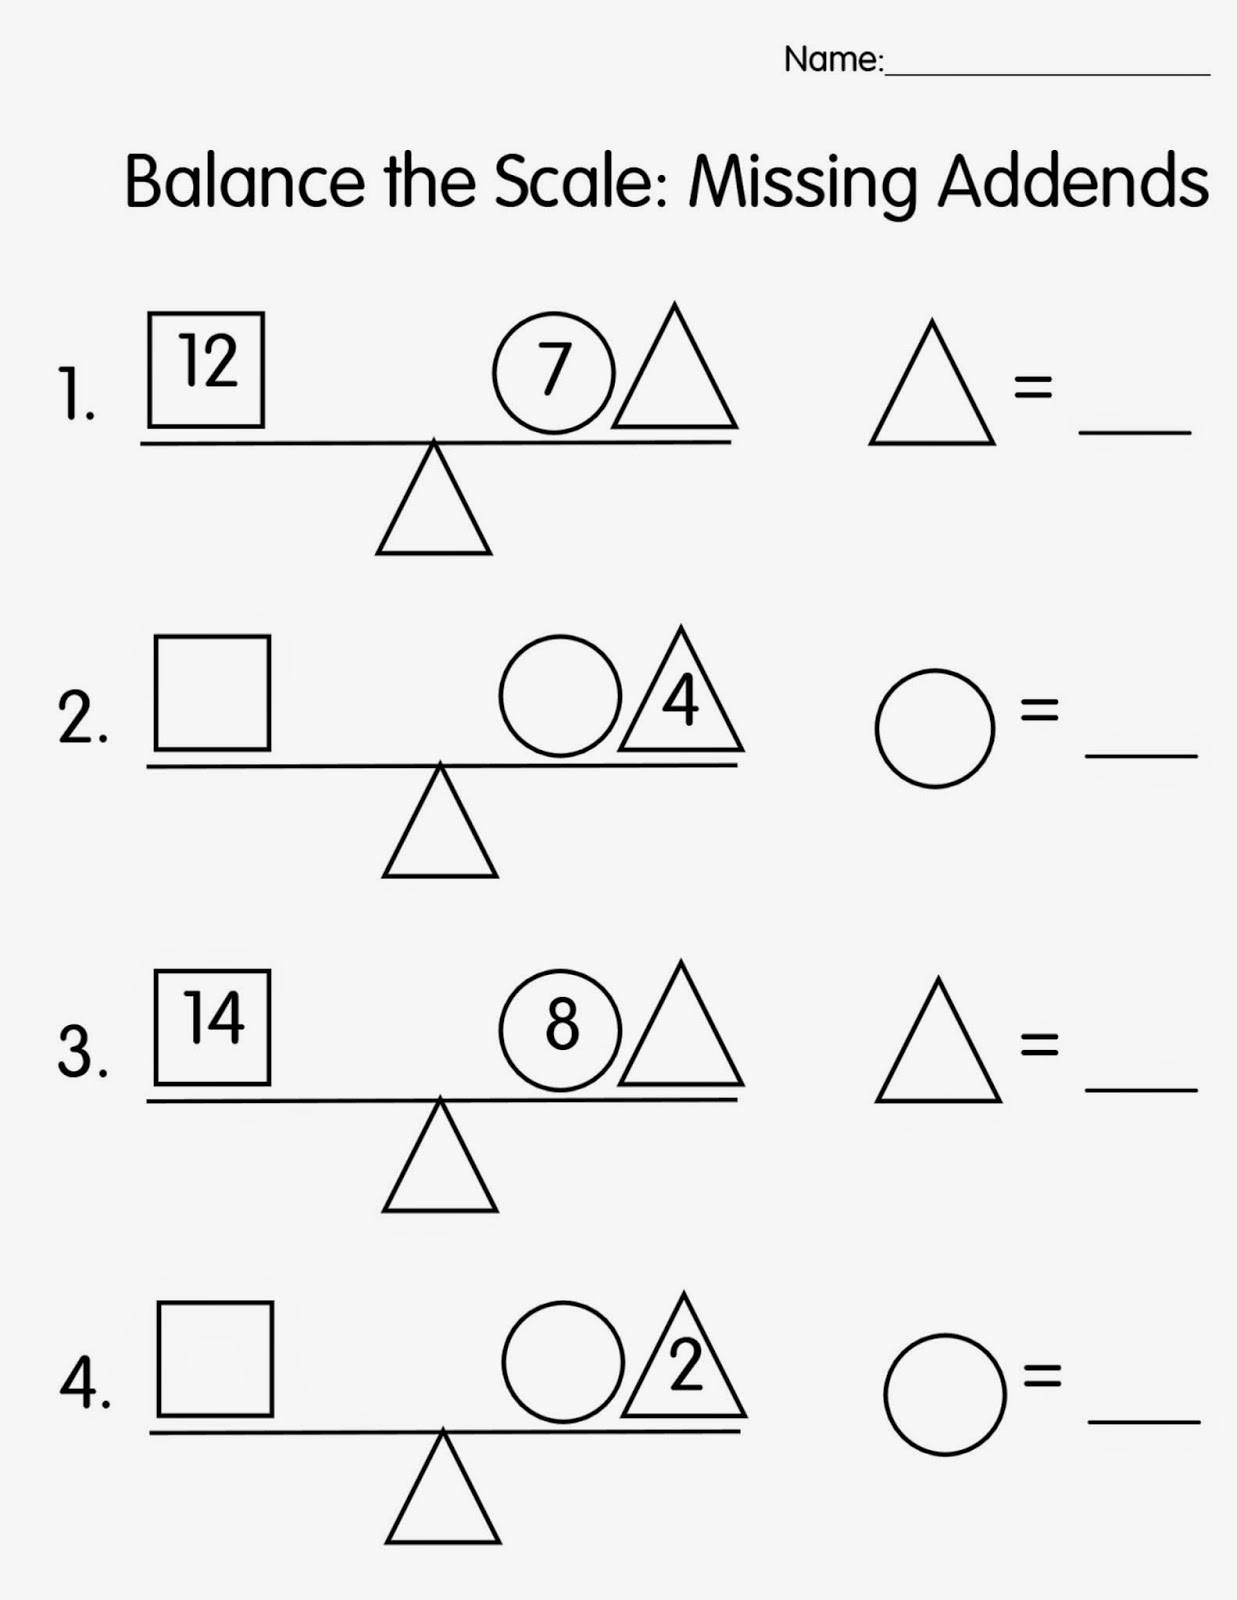 13-best-images-of-missing-addends-word-problems-worksheets-first-grade-math-word-problem